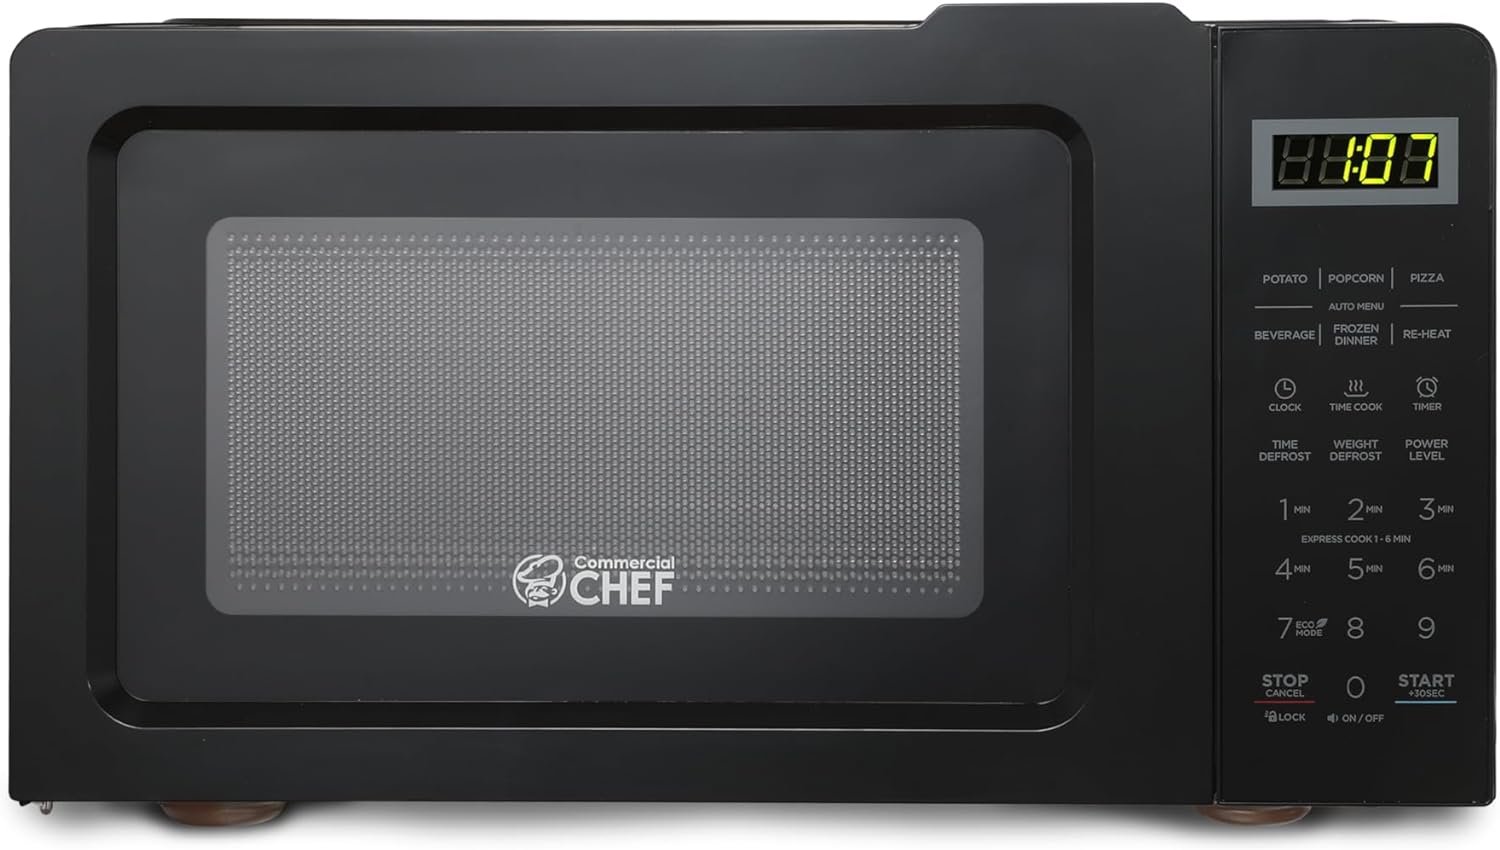 COMMERCIAL CHEF 0.7 Cubic Foot Microwave with 10 Power Levels, Small Microwave with Pull Handle, 700W Countertop Microwave Up to 99 Minute Timer and Digital Display, Black